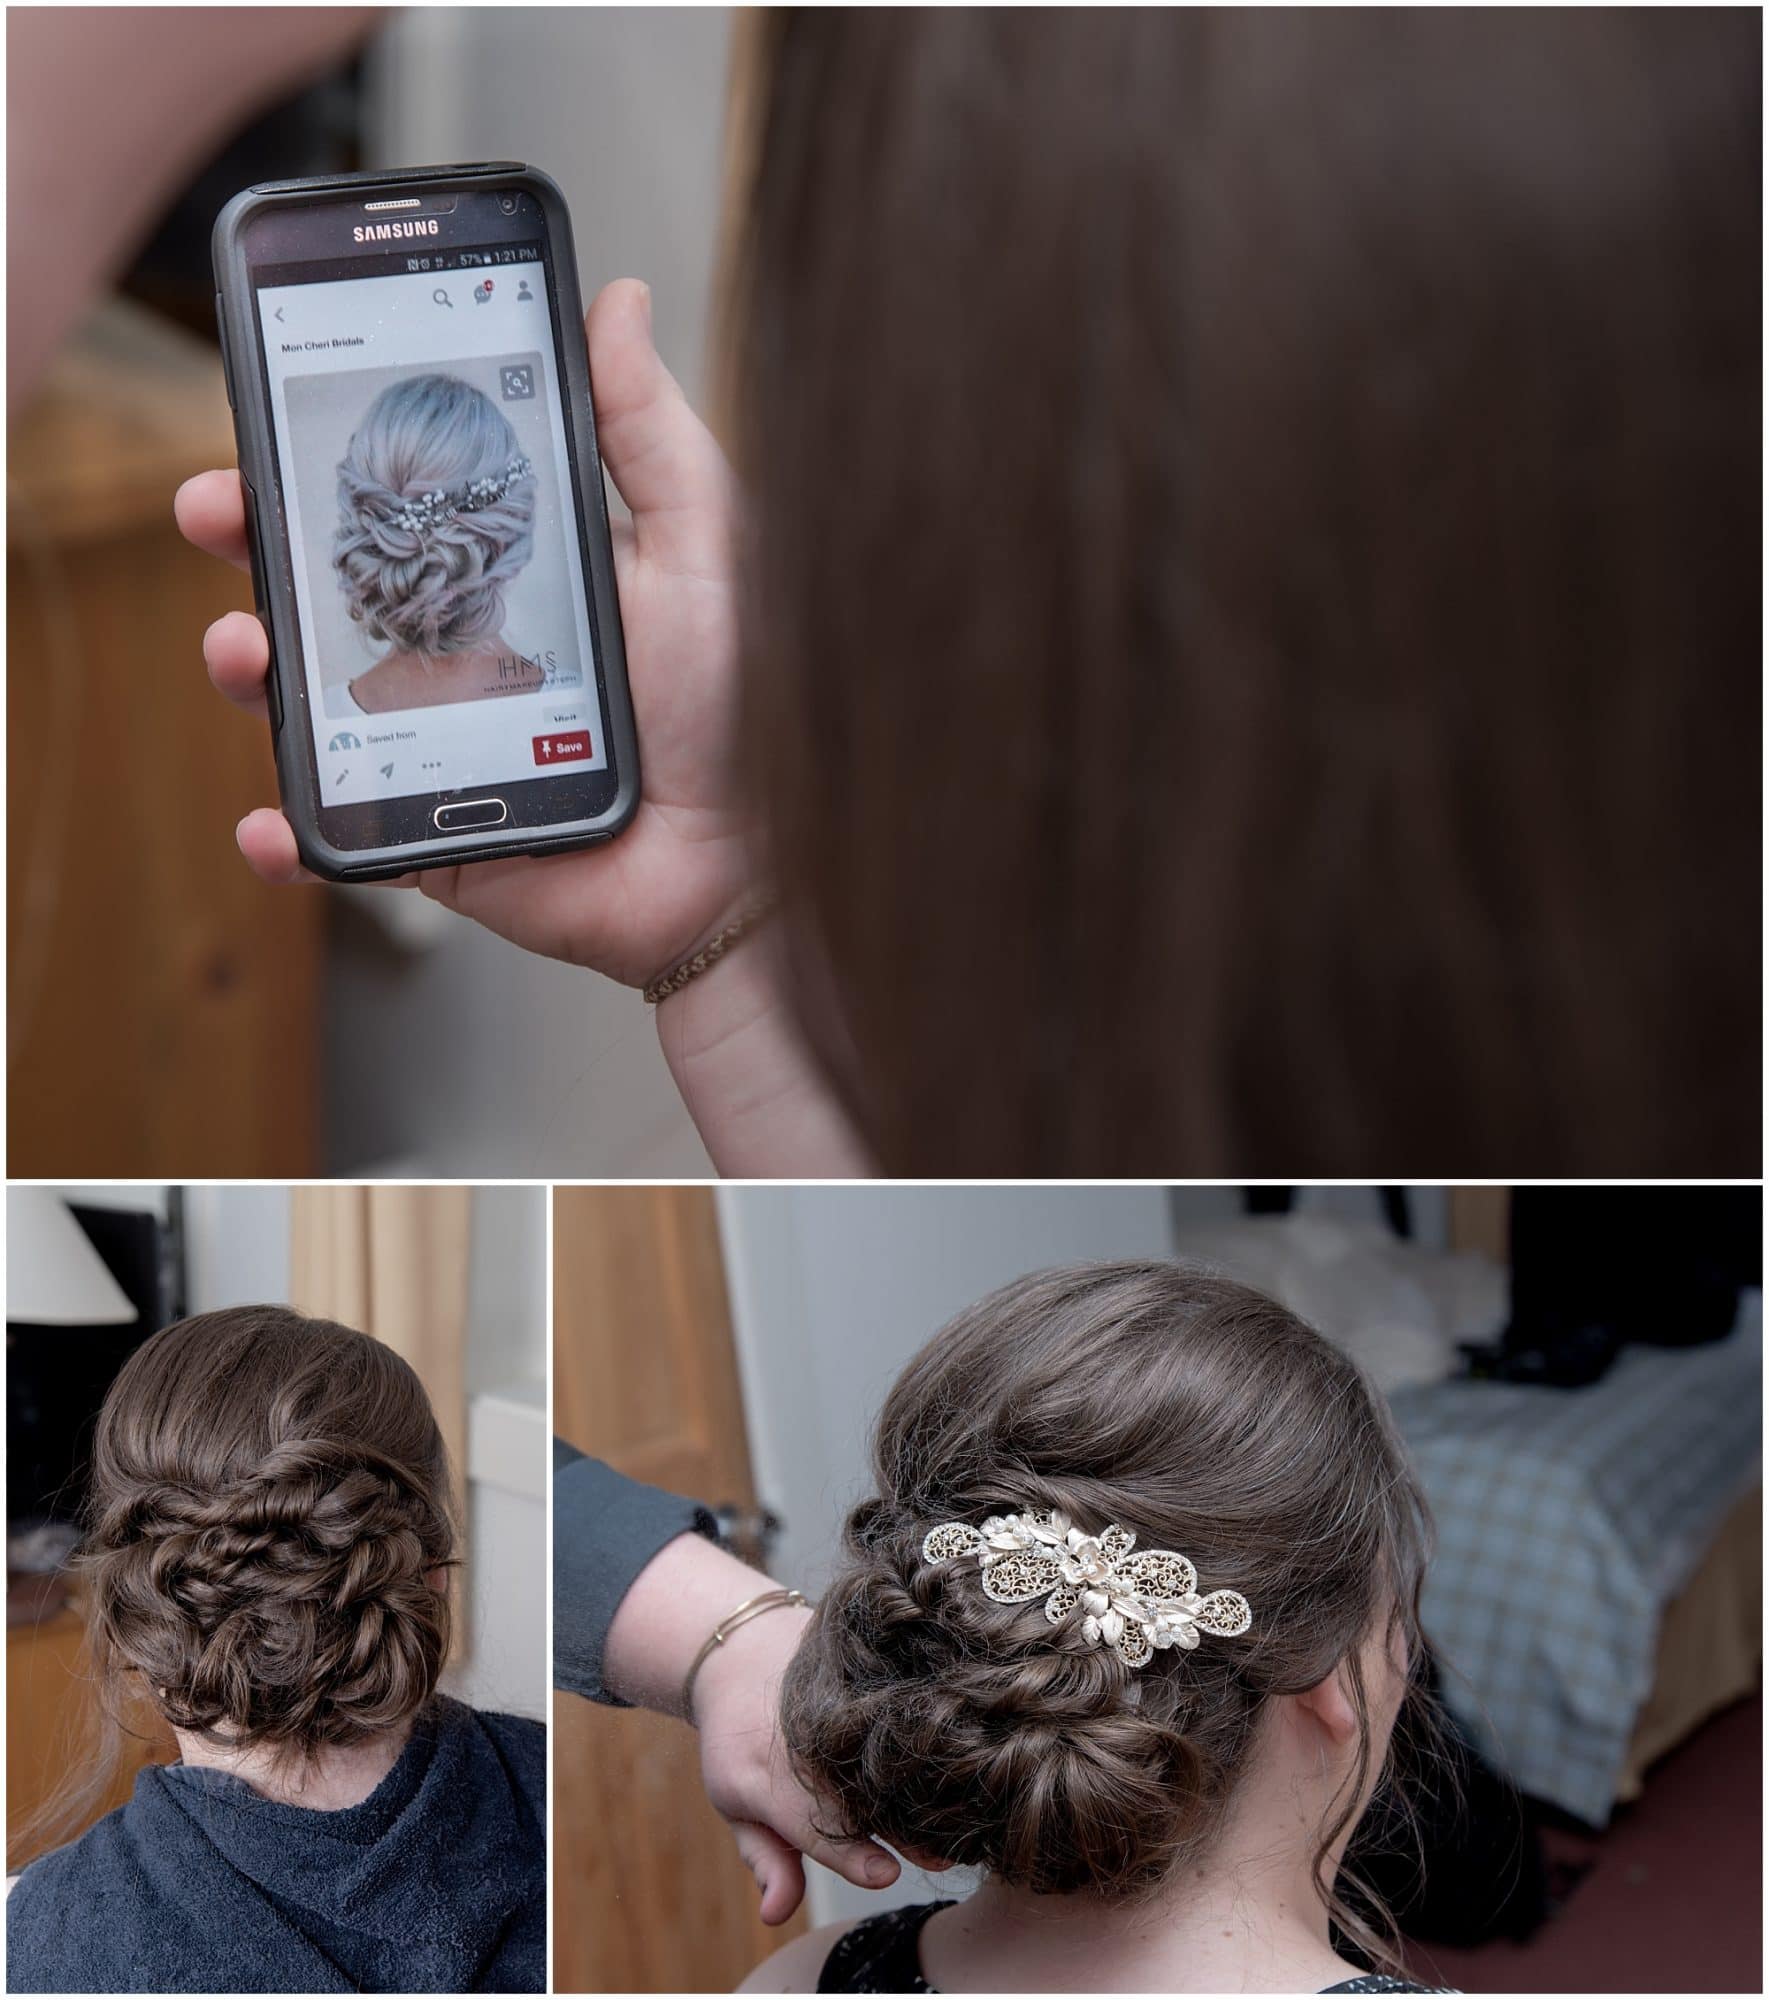 The bride having her bridal hairstyle created during her bridal prep for a White Point wedding.